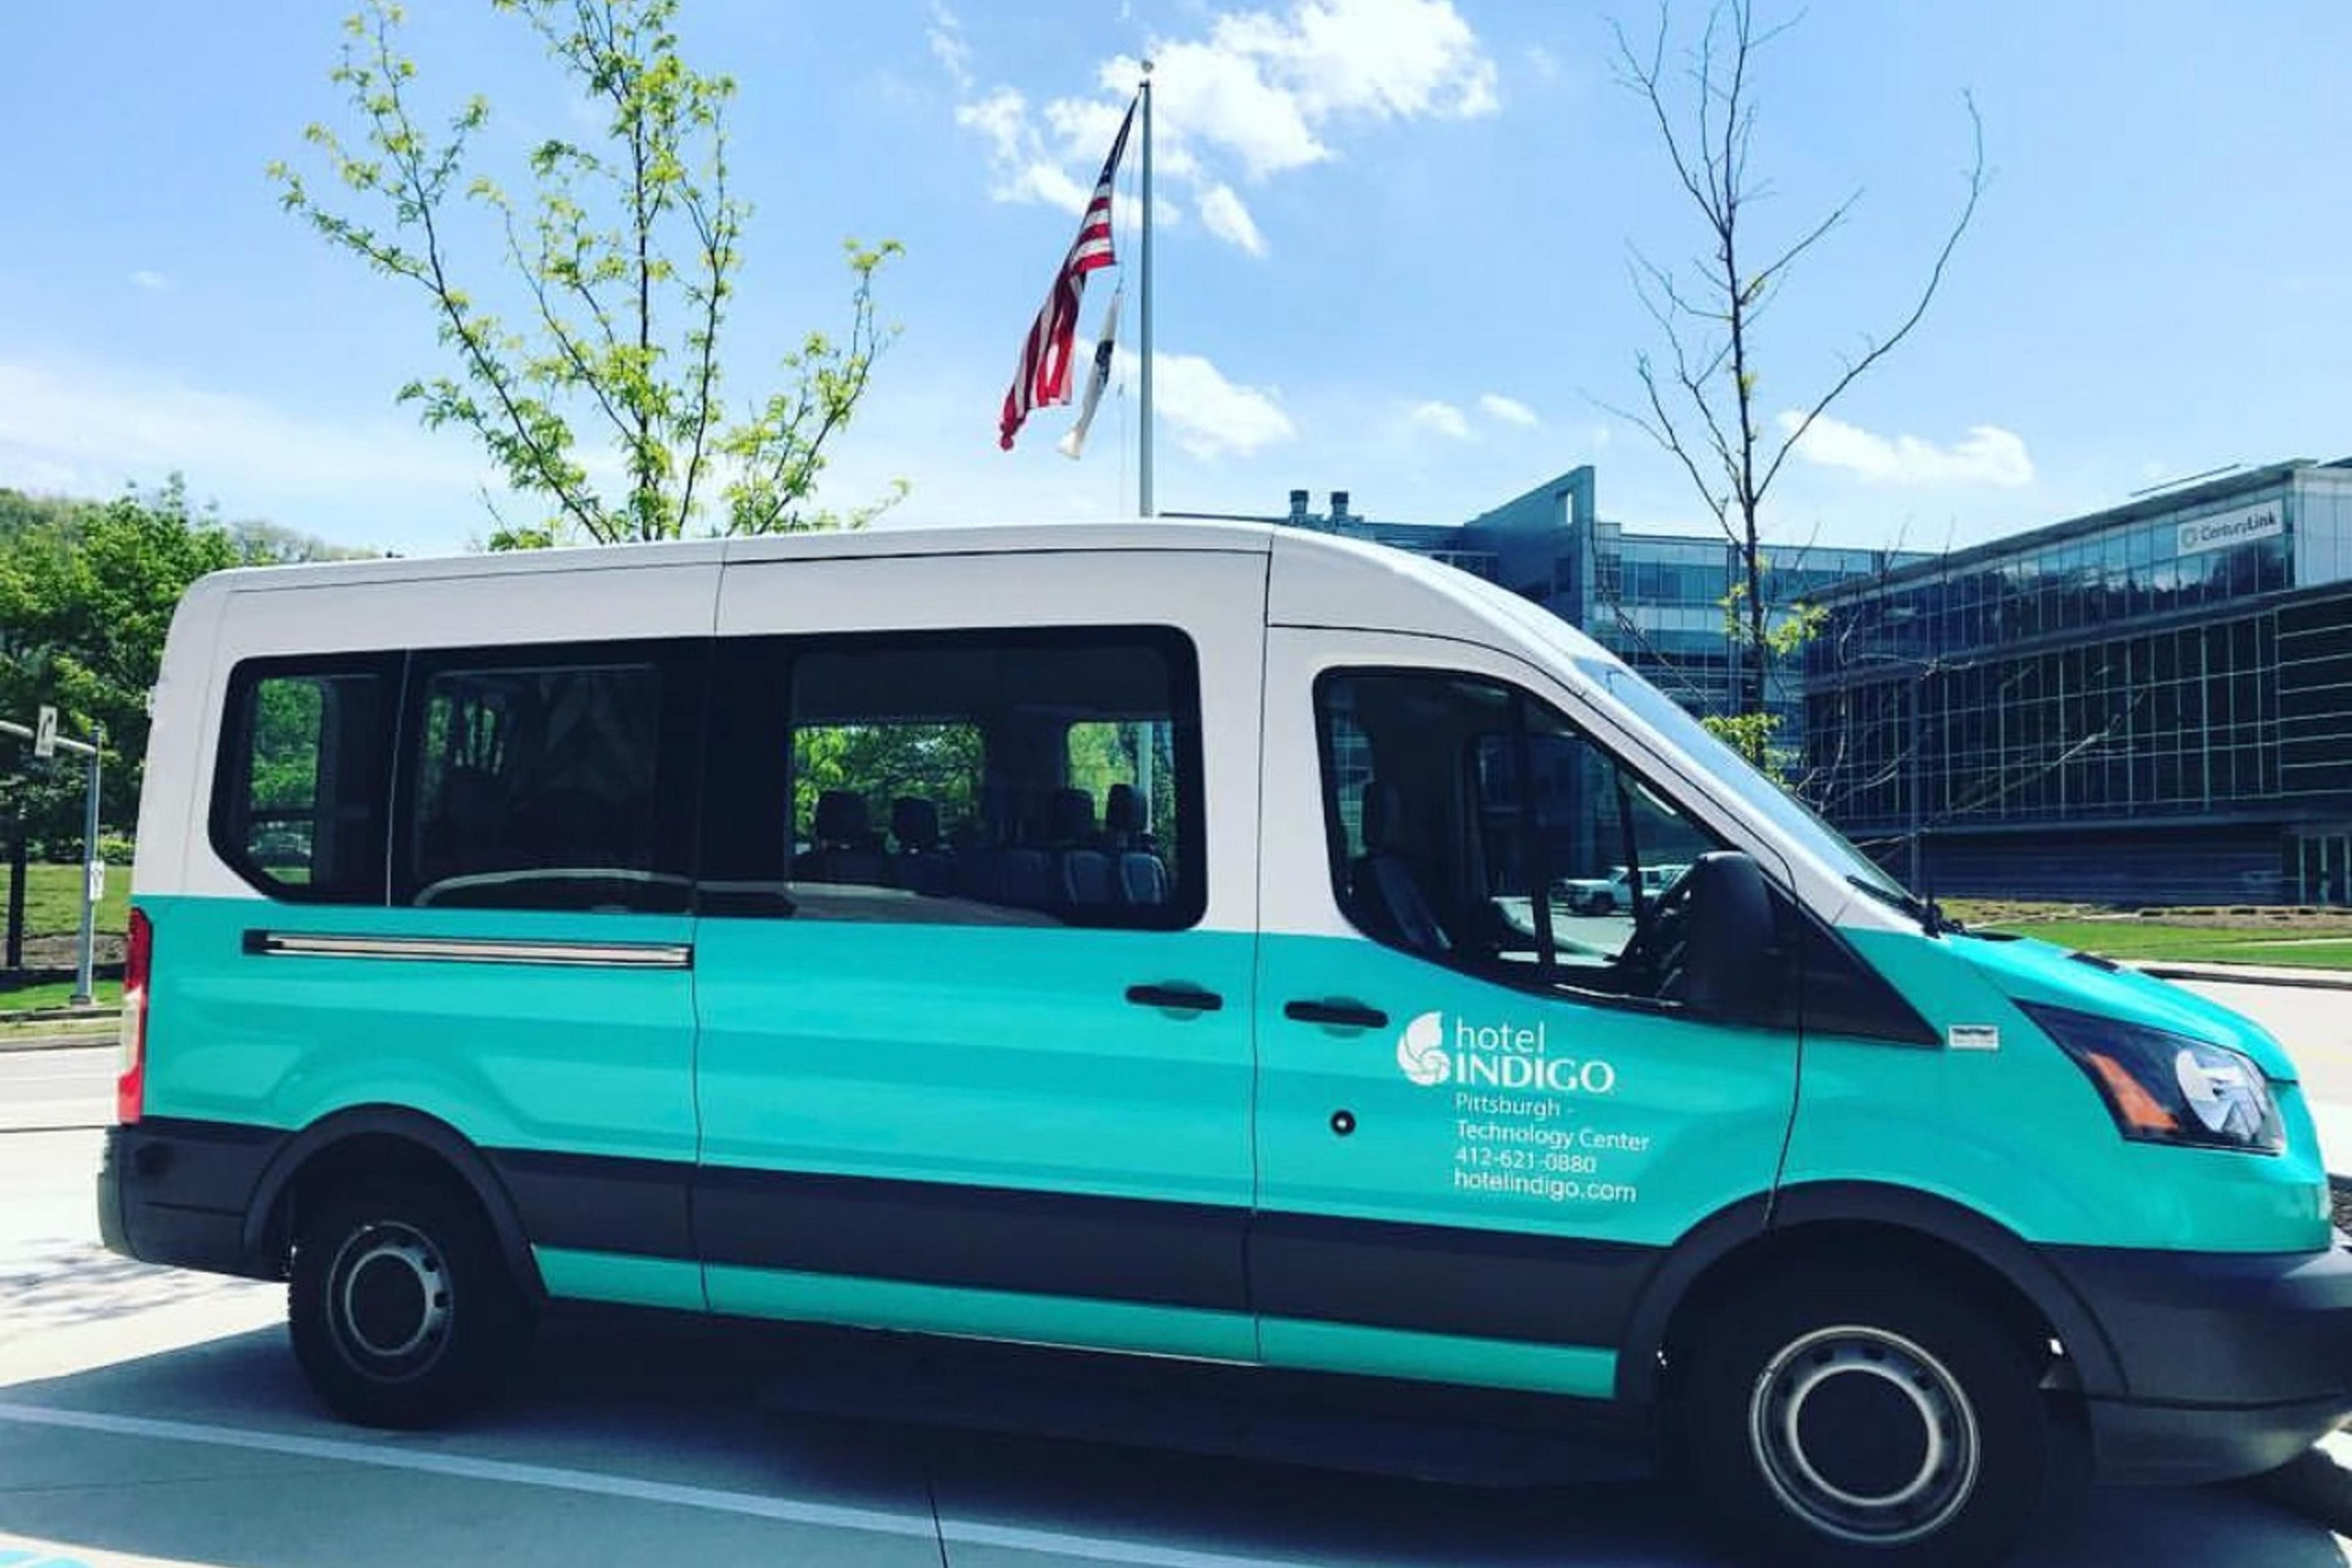 12 passenger shuttle available to all guests and will travel within a 3-mile radius visiting local universities such as Pitt, CMU, Carlow, Chatham and Duquesne along with UPMC Medical facilities and Hazelwood Green featuring Mill 19 and OneValley.  Shuttle is based on availability - Call the hotel for more details